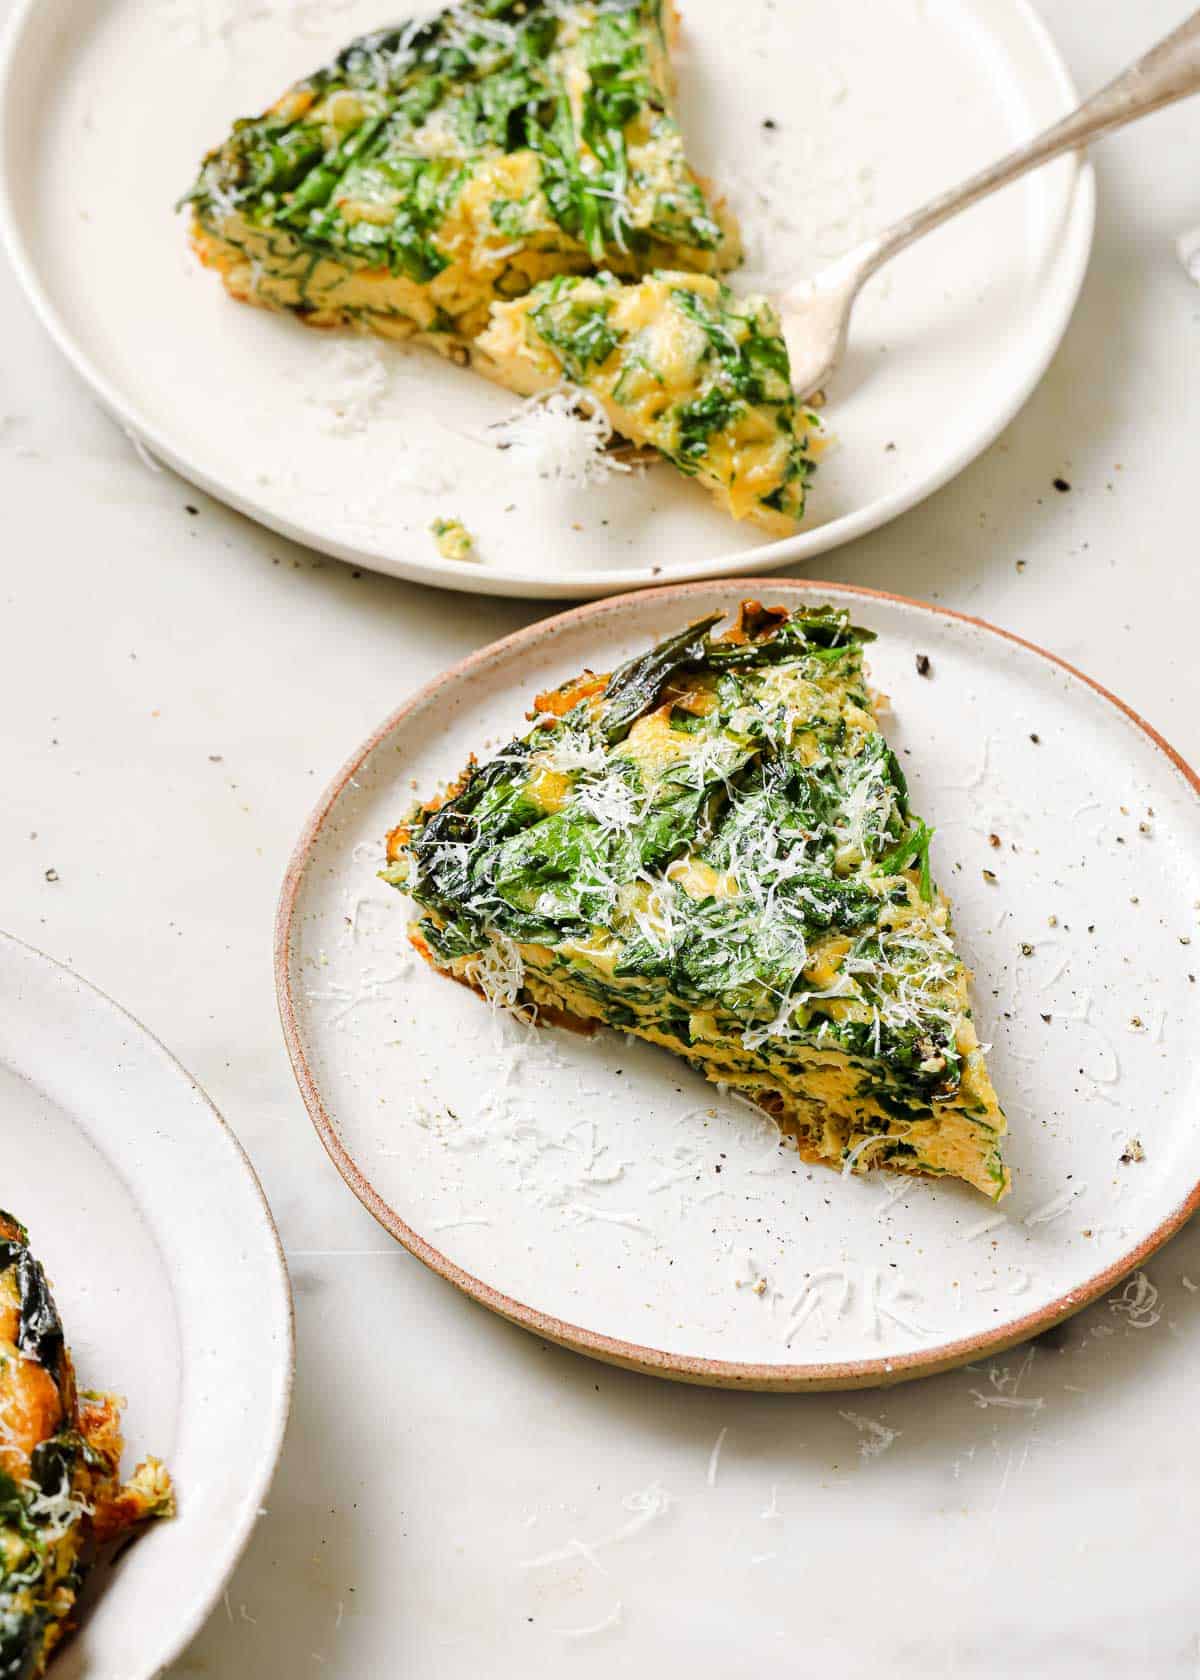 Slices of a baby spinach frittata on plates.